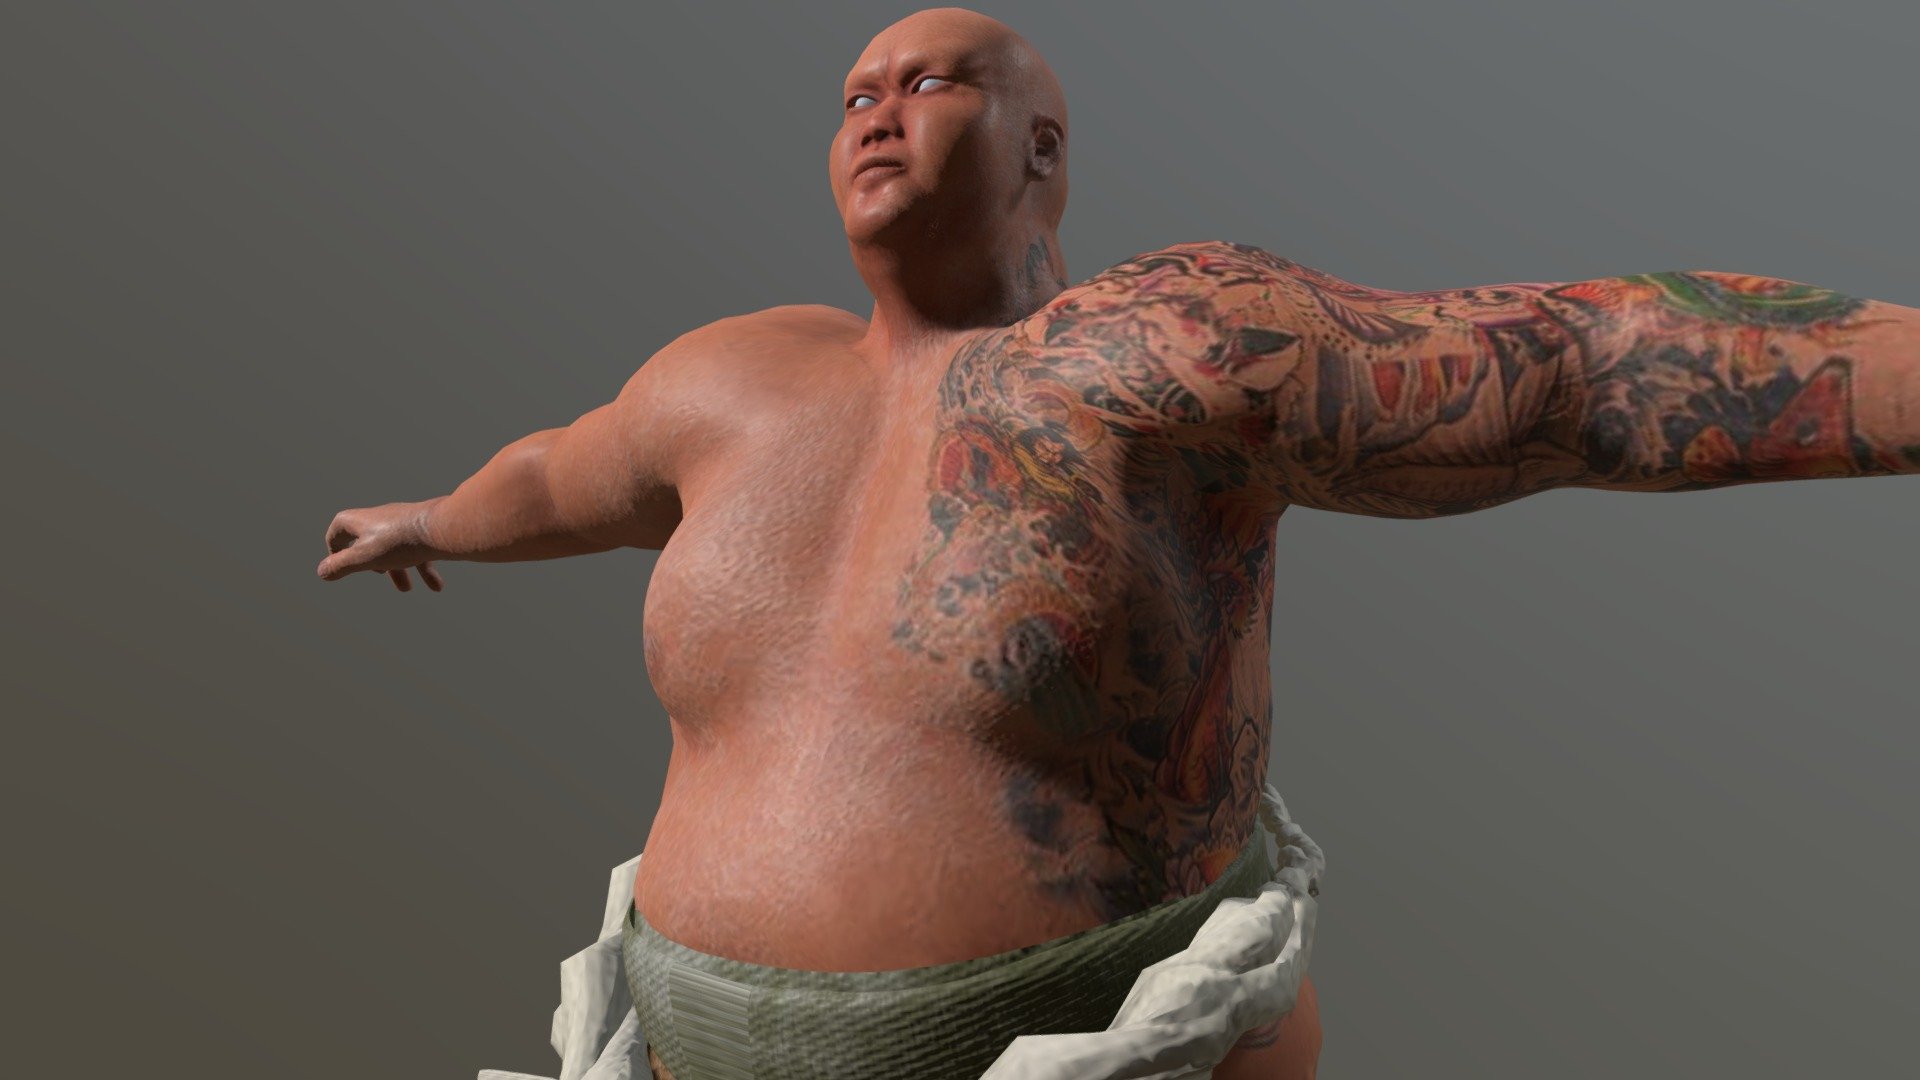 A Character os Man sport Sumo.
Sculpt in Zbrush models, in blender and 3ds max and textures in Sp.
Testures for Material PBR.

Rigged body and Face 3d model